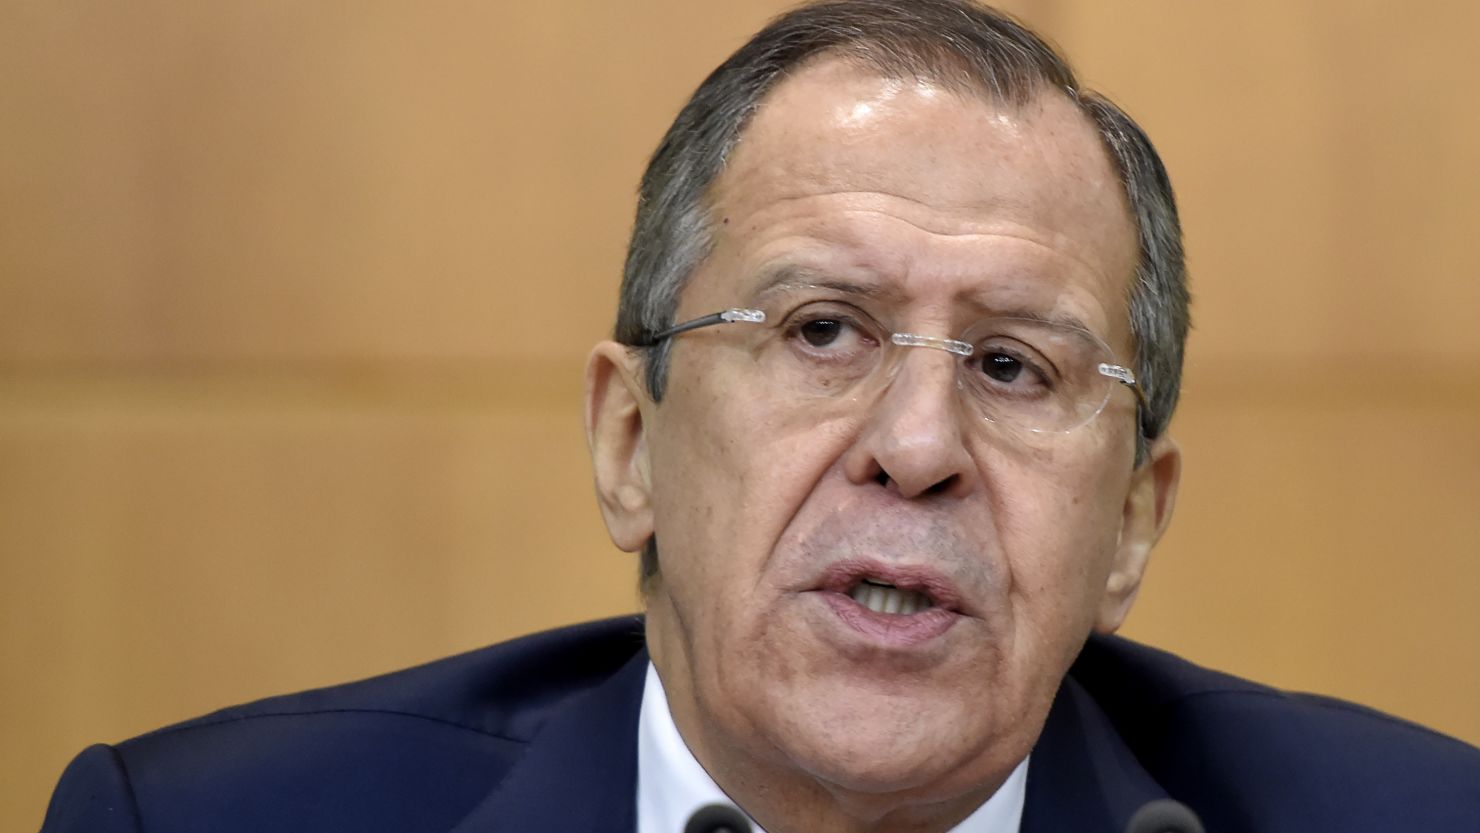 Russian Foreign Minister Sergey Lavrov spoke about the Berlin case at a Moscow news conference Tuesday.